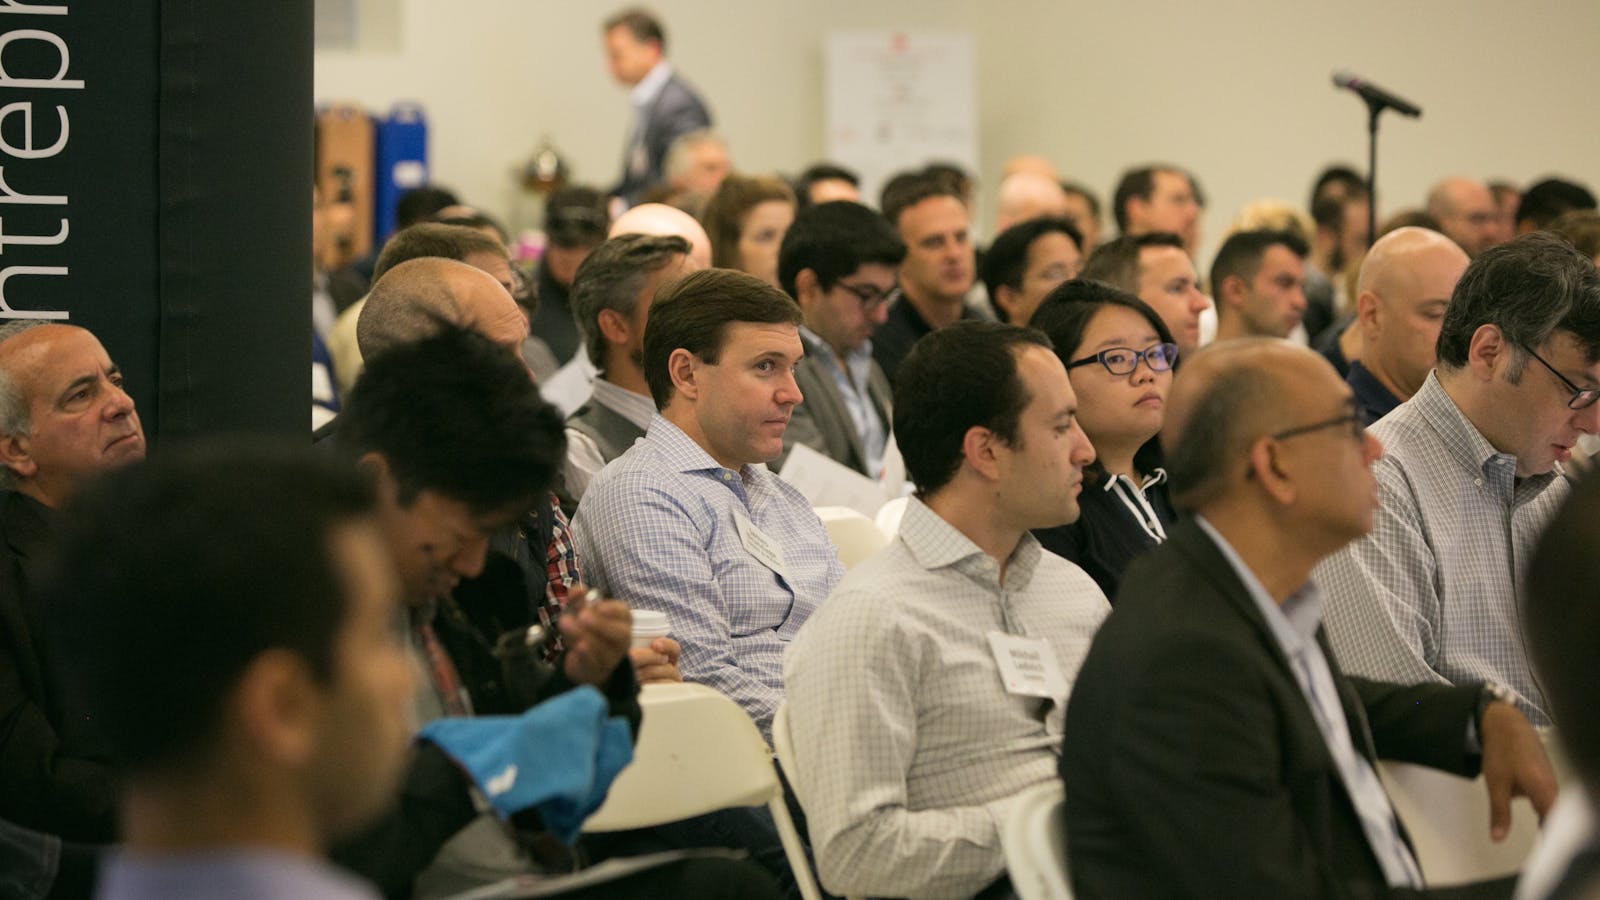 Attendees at Friday's Subscriber Summit in San Francisco. Photo by Julie Mikos.